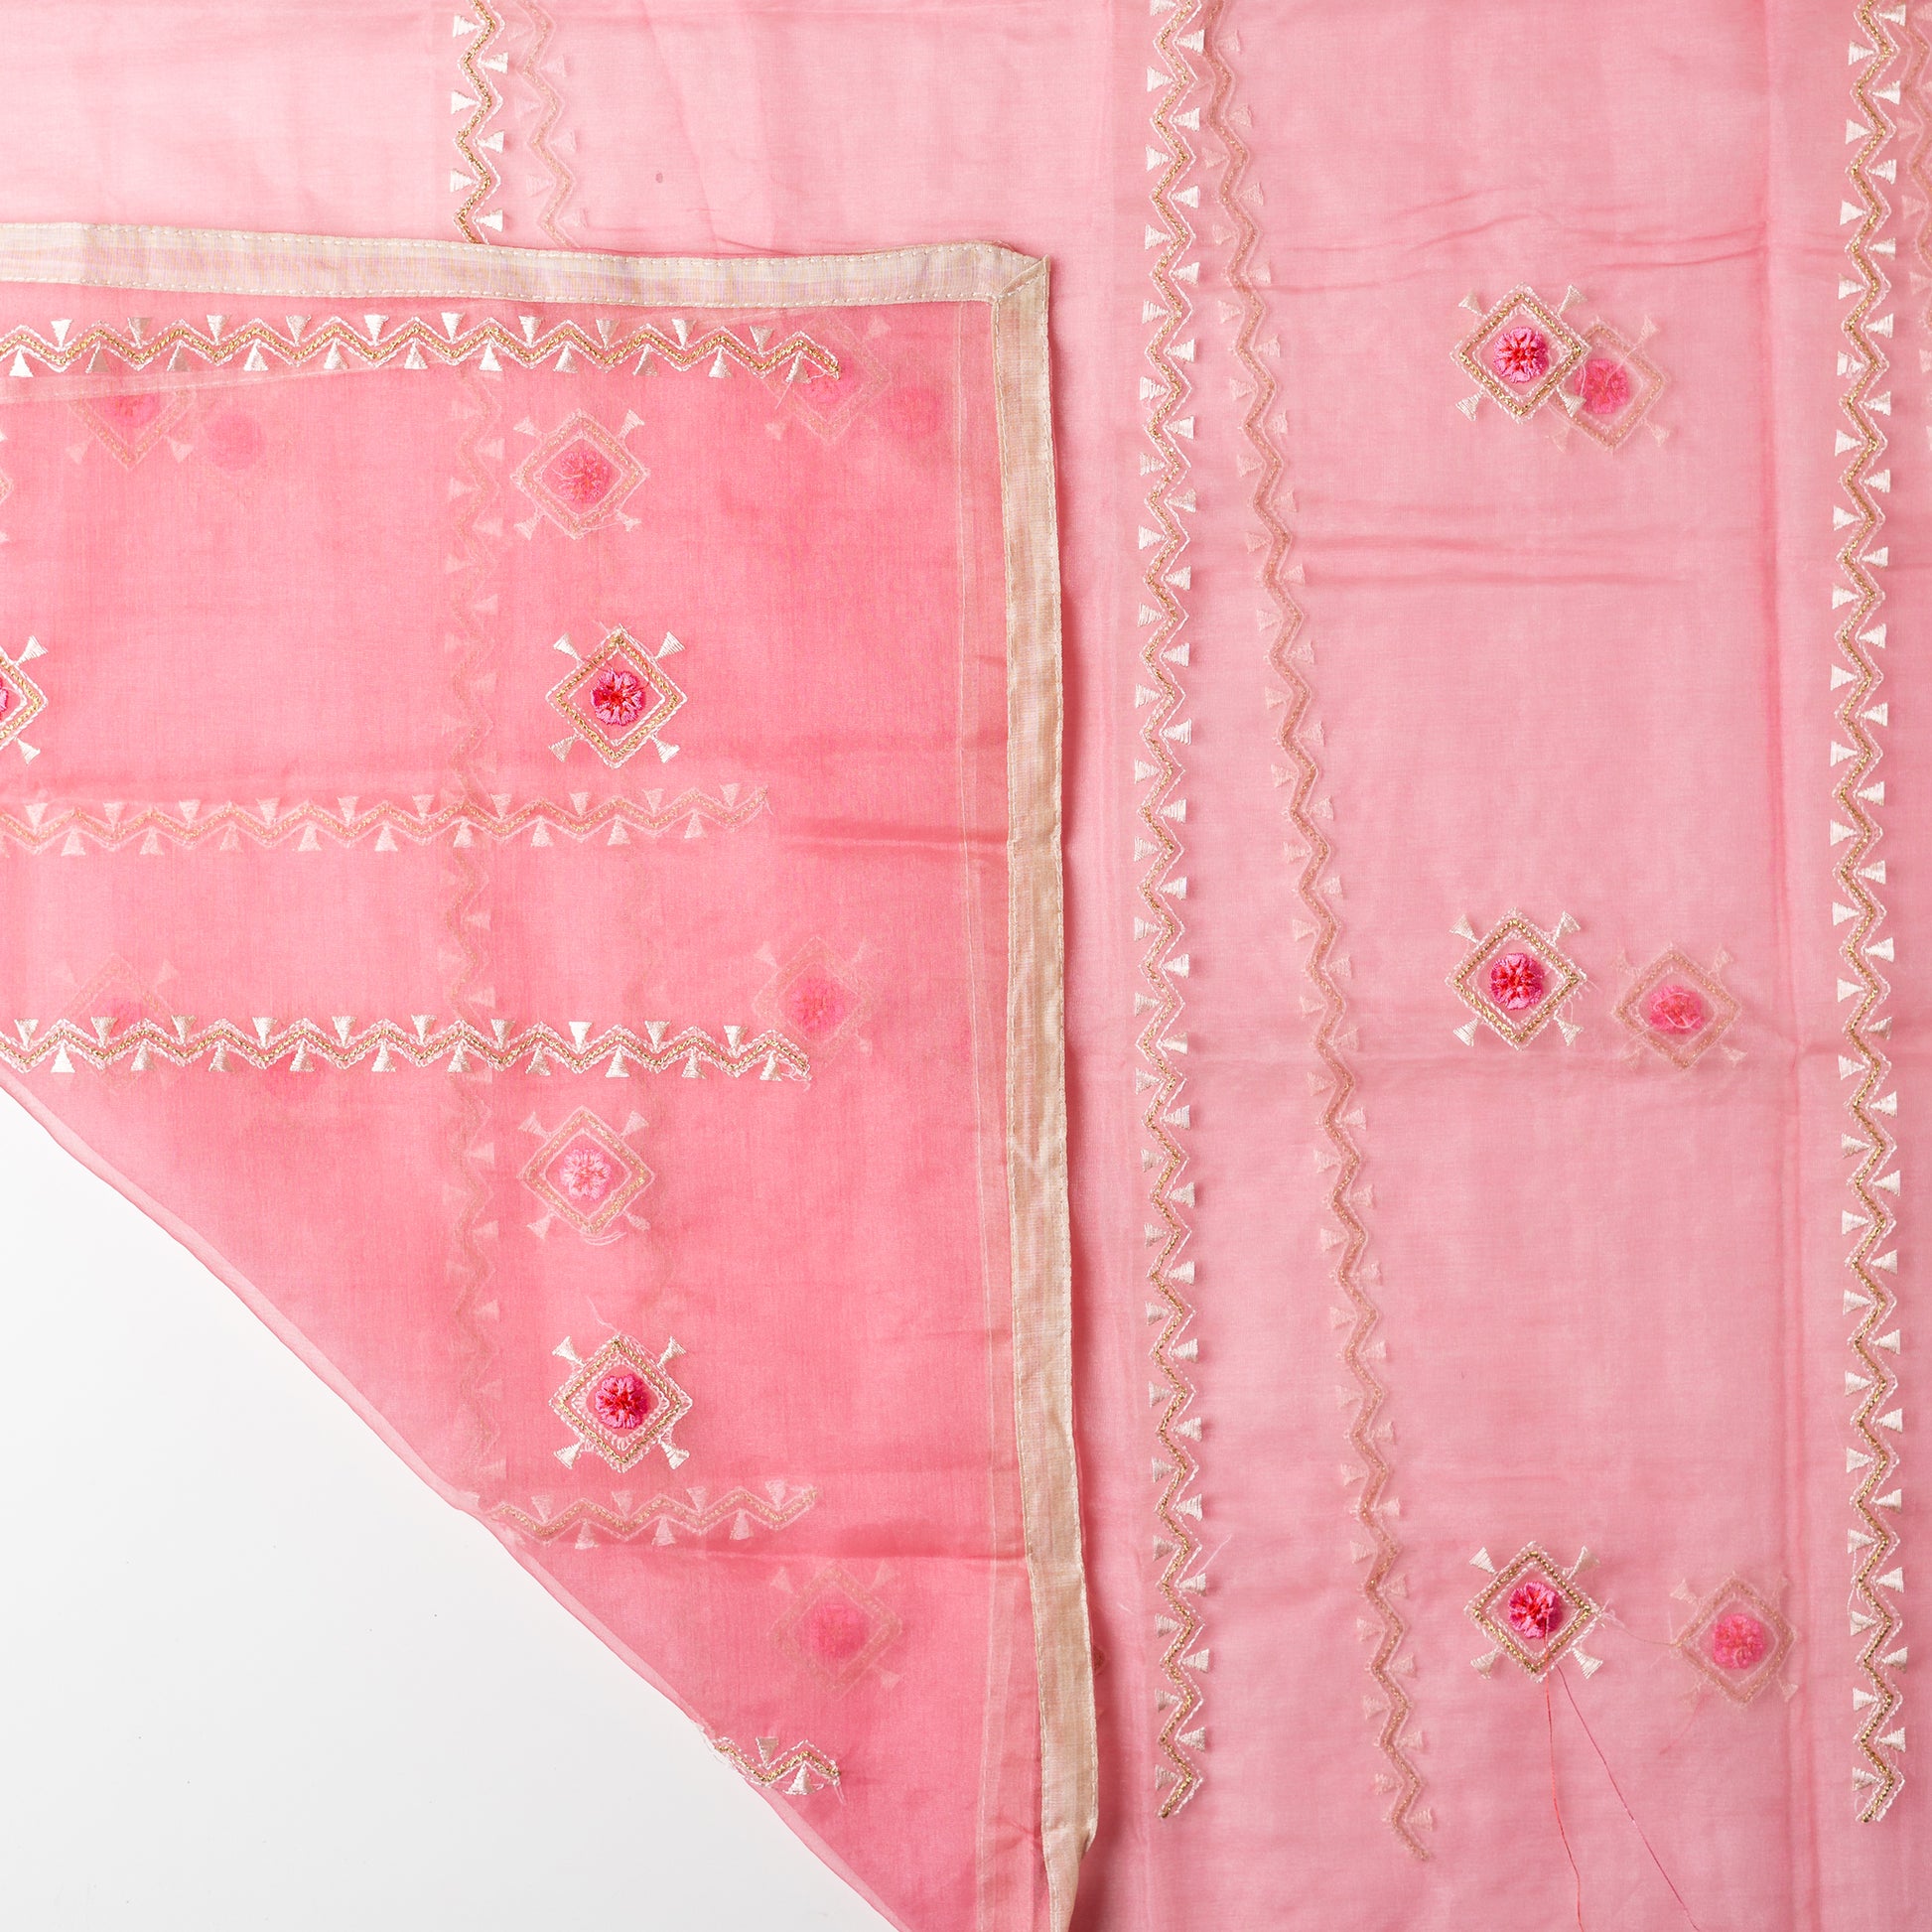 Silk pink color dupatta with embroidery work and thread work in zari, chanderi silk cream color border matching the top